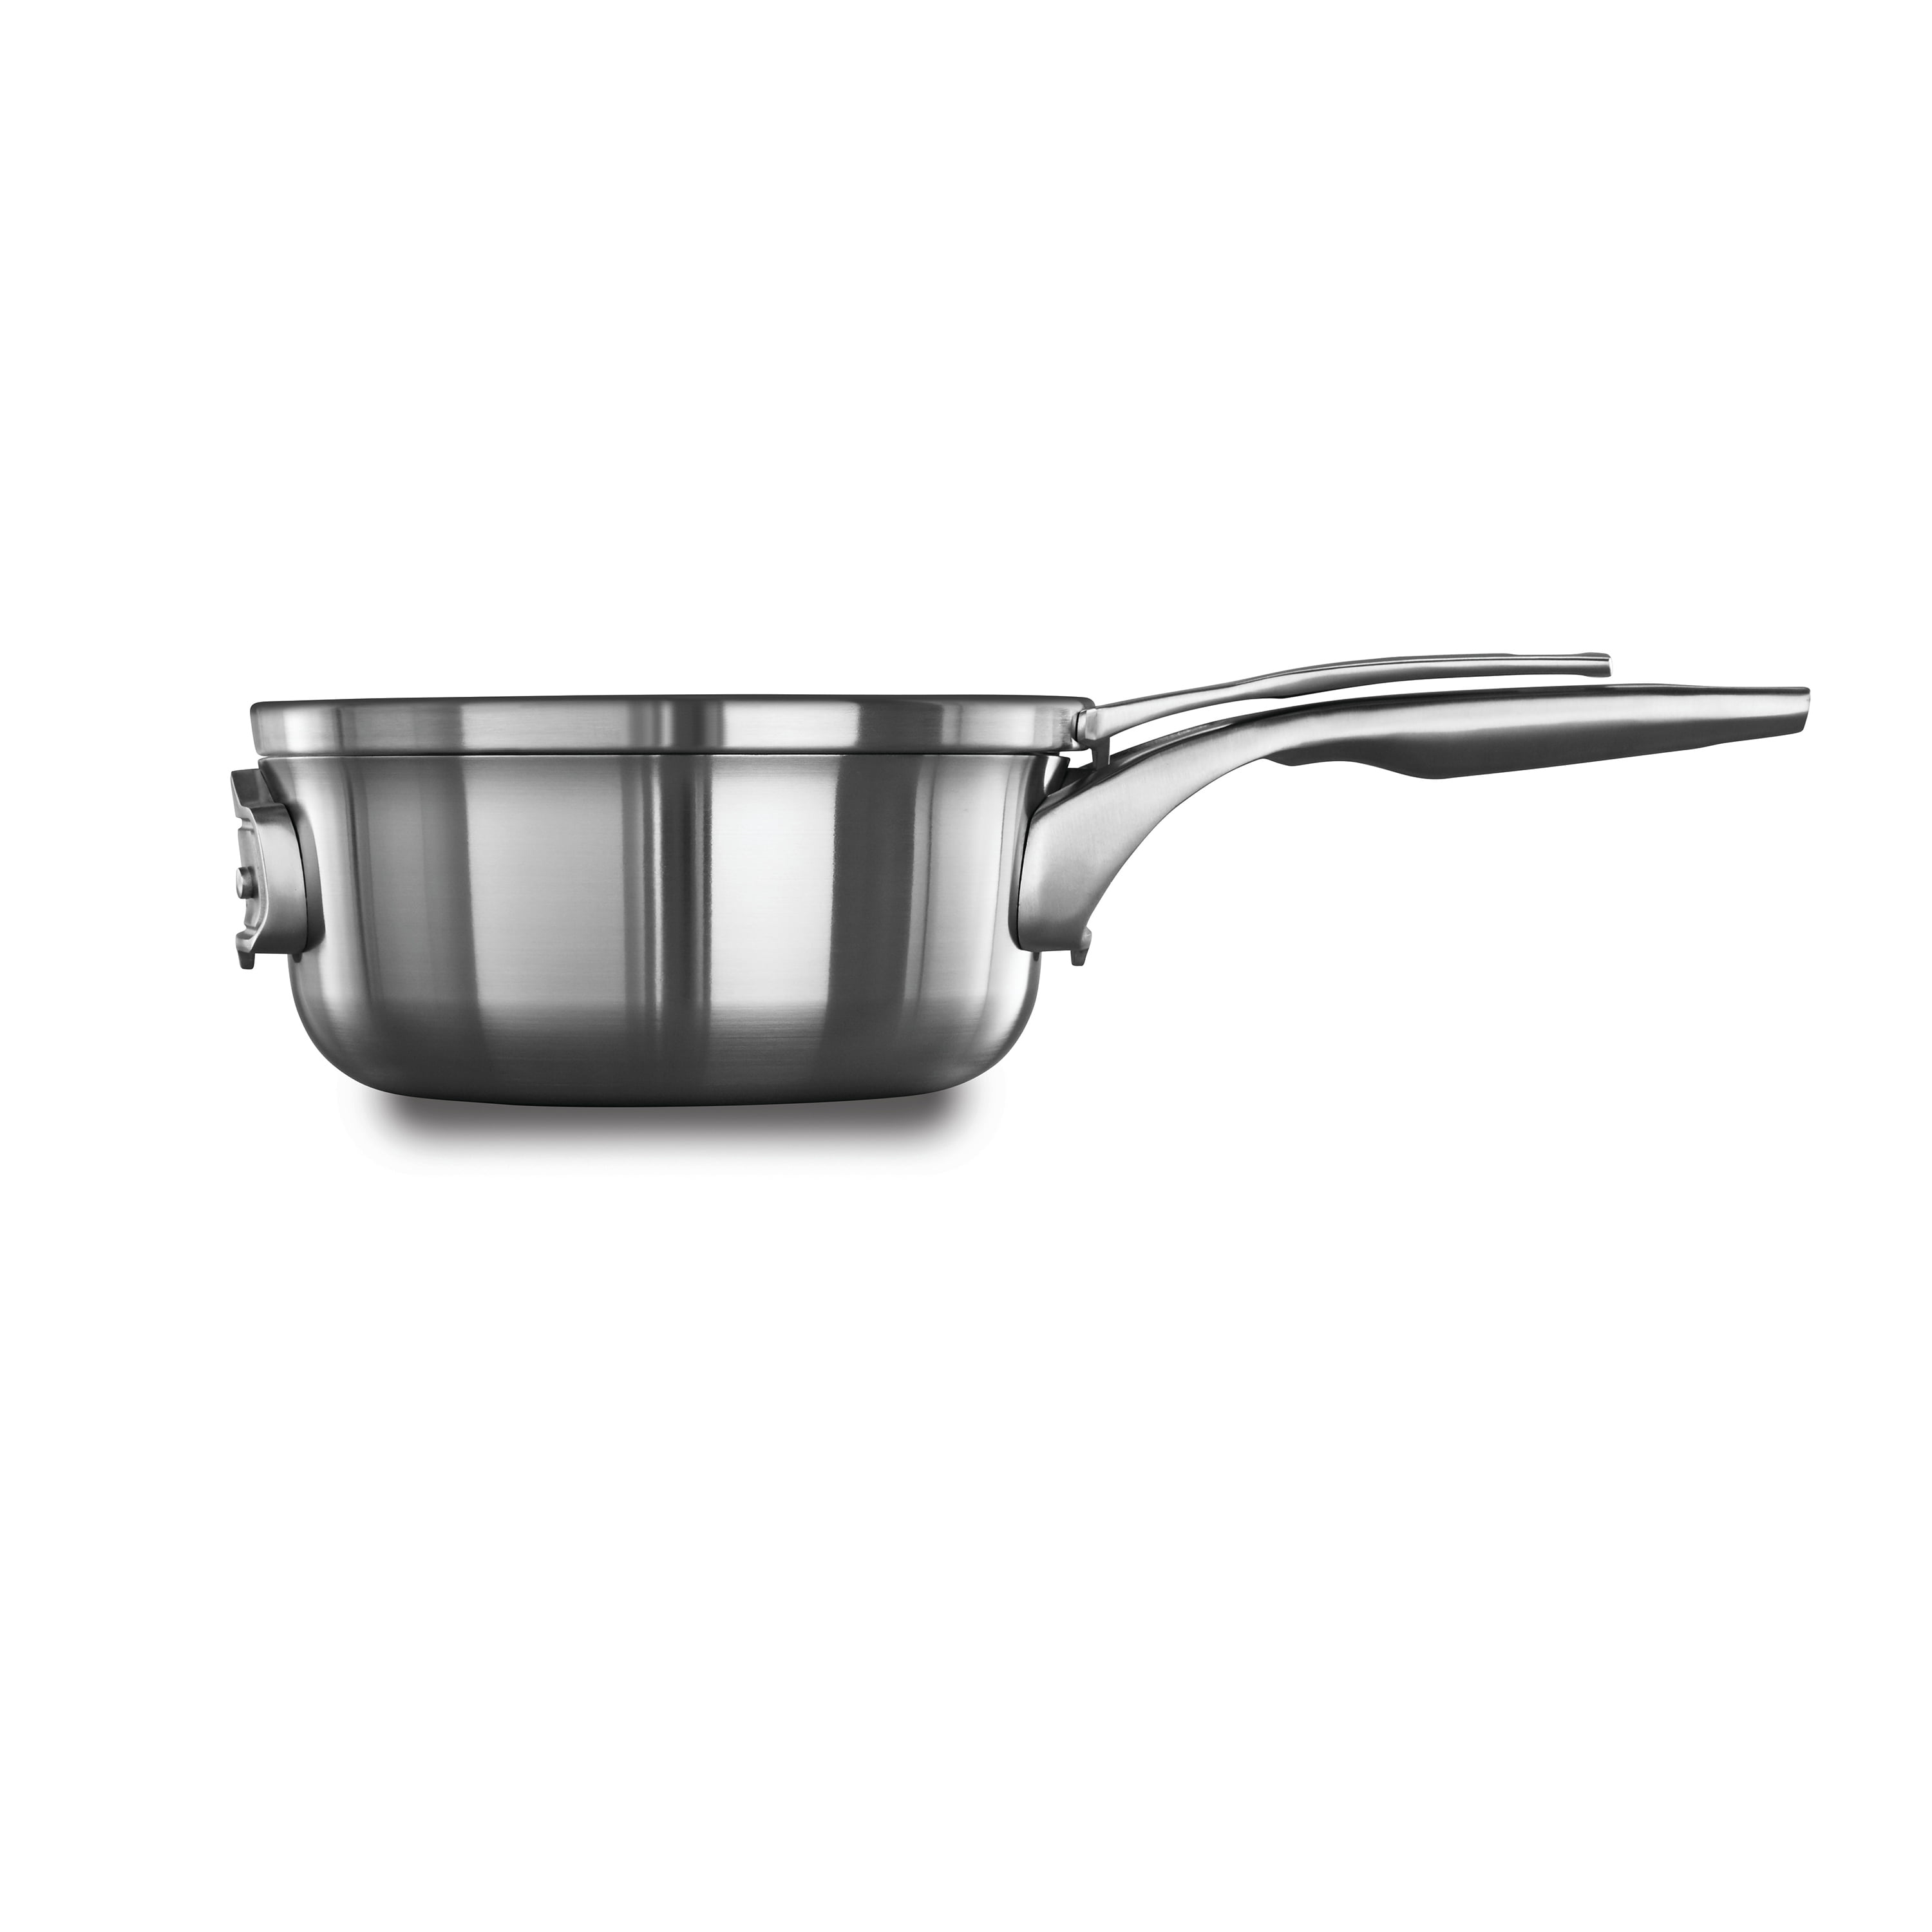 Calphalon Premier Stainless Steel 2.5-Quart Saucepan with Cover, Silver